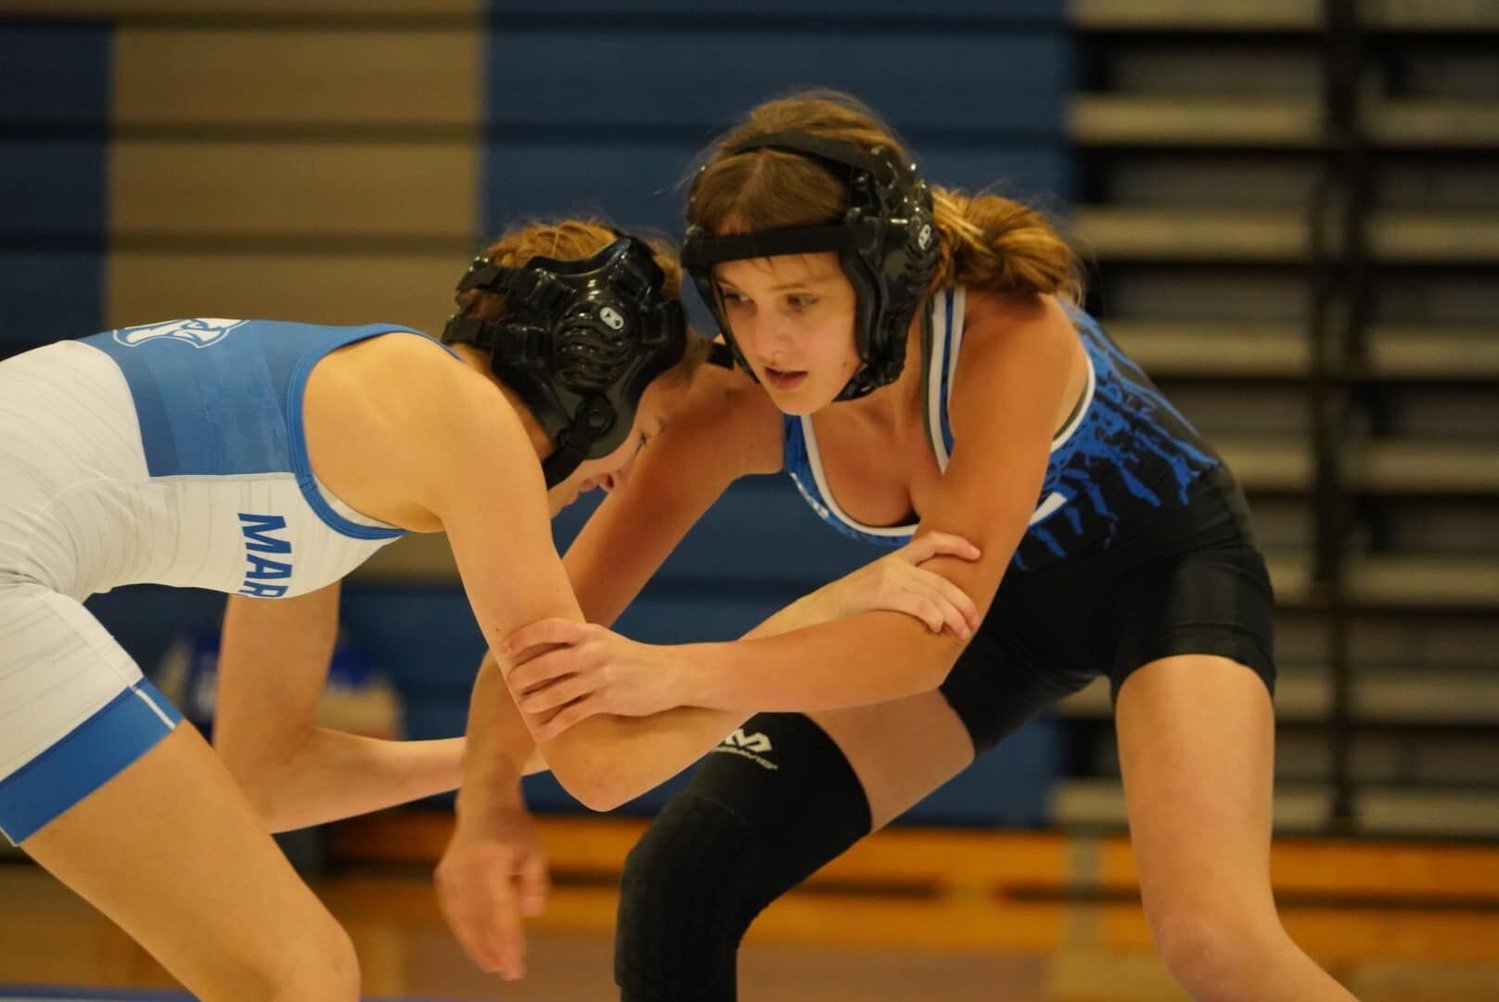 “Our first dual competition will be at Ozark on November 29 against two very competitive teams in Ozark and Cassville,” shared girls head coach Adam Wright. “We are a young team with only one senior but we have a lot of talent. I am excited to see how our younger girls compete and see how far our experienced wrestlers have progressed since last season.” In white: Sophomore Bianca Dockery. In blue: Freshman Bayleigh Cruise.